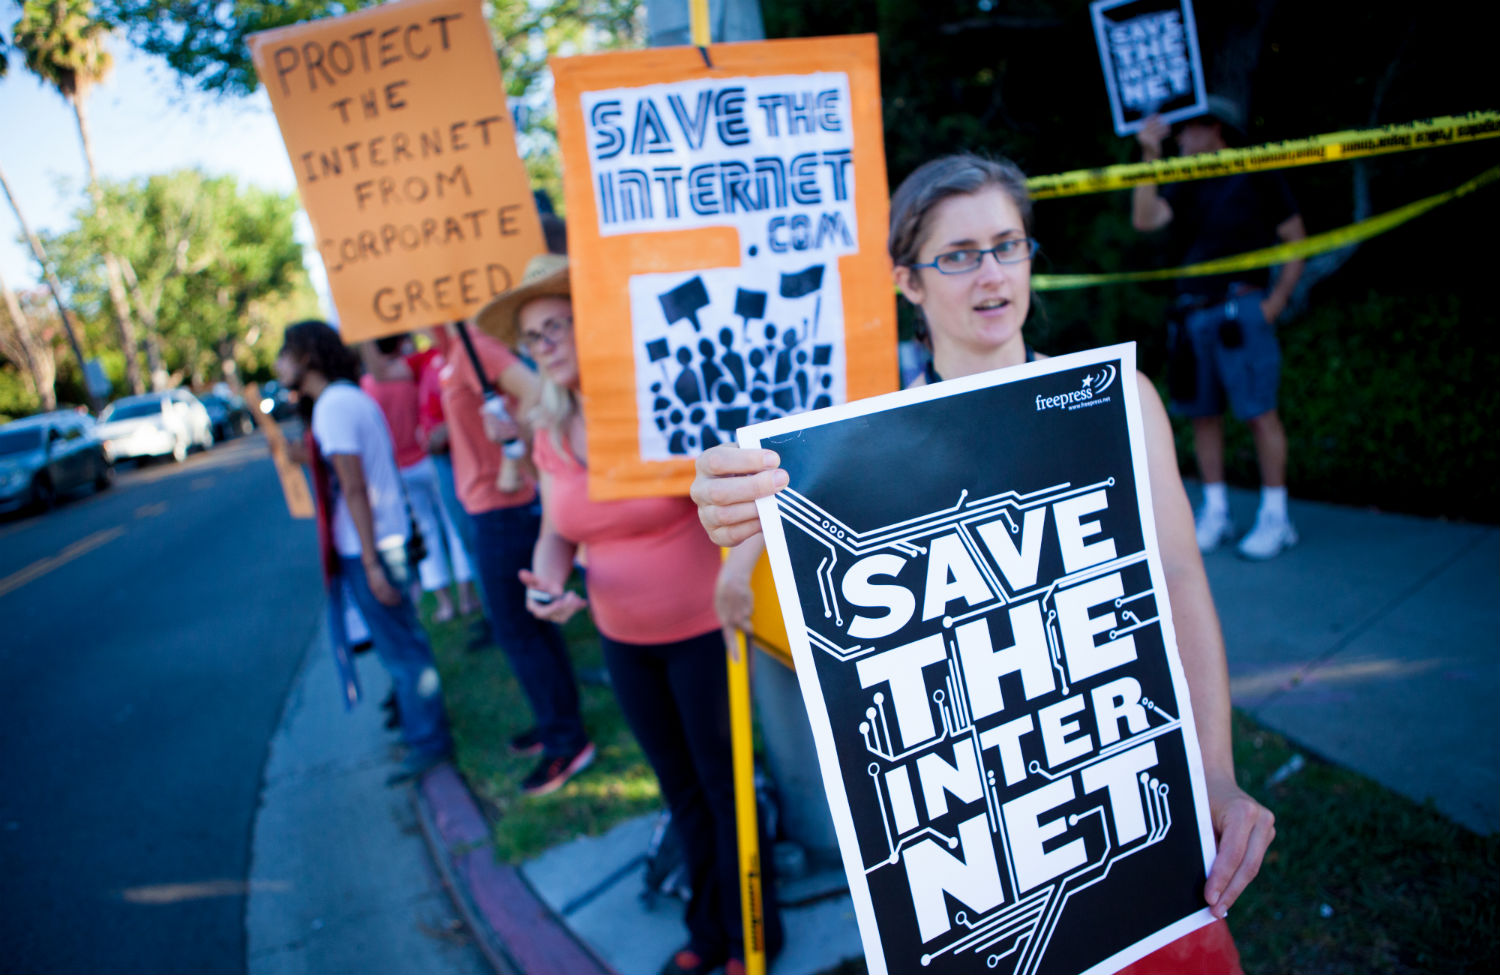 Obama Tells the FCC to ‘Implement the Strongest Possible Rules to Protect Net Neutrality’